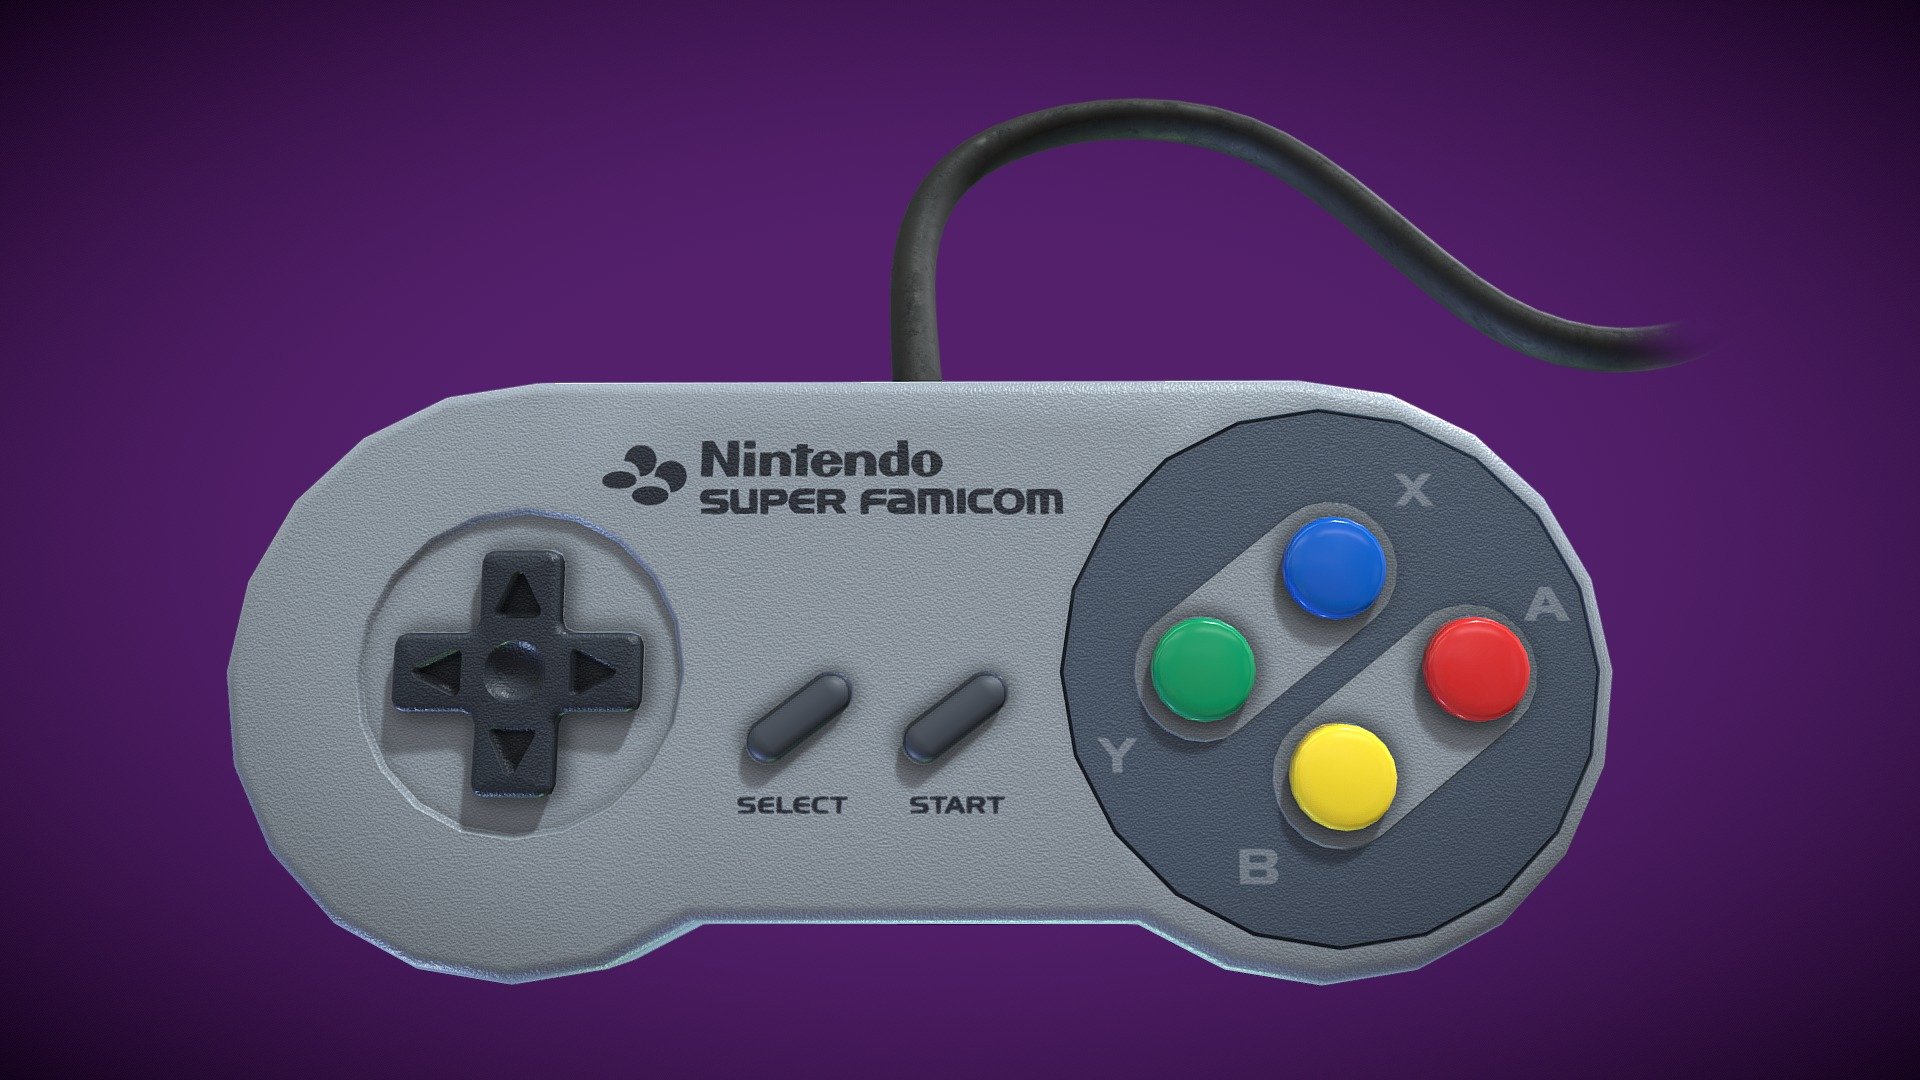 Super Famicom (Super Nintendo) Controller

While the model is always free to download, a like, comment, and follow would be greatly appreciated. 

Modeled in Maya from scratch. Textures made in Photoshop and Substance Painter.

Files included:

 


  
OBJ
  
Color map 2048 x 2048
  
Metallic map 2048 x 2048
  
Roughness map 2048 x 2048
  
Normal map 2048 x 2048
  
Opacity map 2048 x 2048



Tune in to Twitch at https://www.twitch.tv/animatezach and watch me 3D model live! 

http://animatezach.com/ - Super Famicom Controller (SNES) - Download Free 3D model by animatezach 3d model